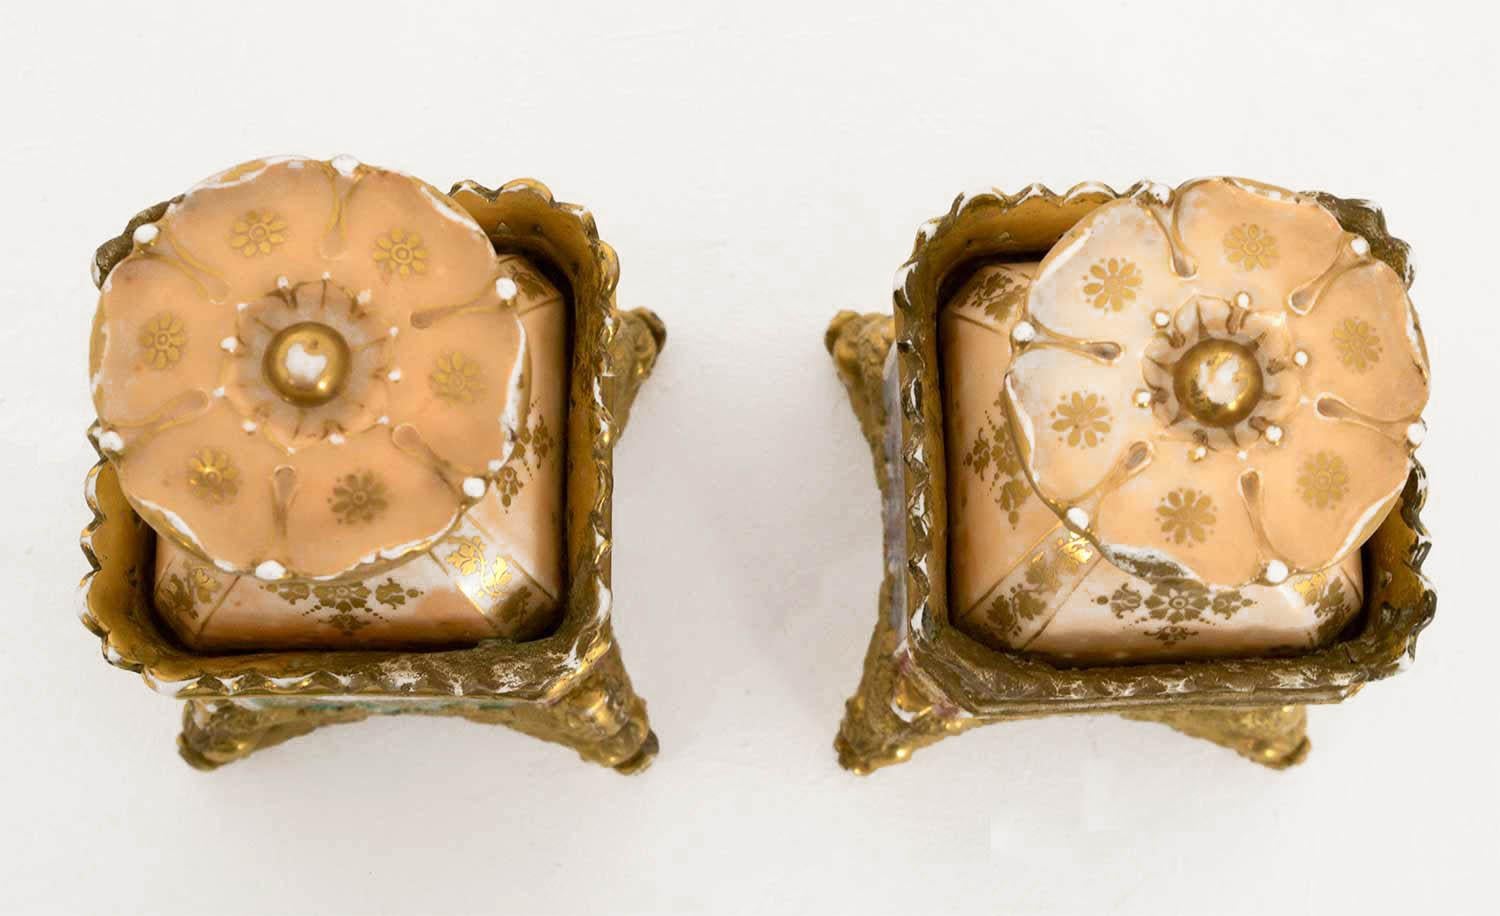 Jacob Petit, Pair of Flasks with Canted Corners in Enameled Porcelain, 1840 1